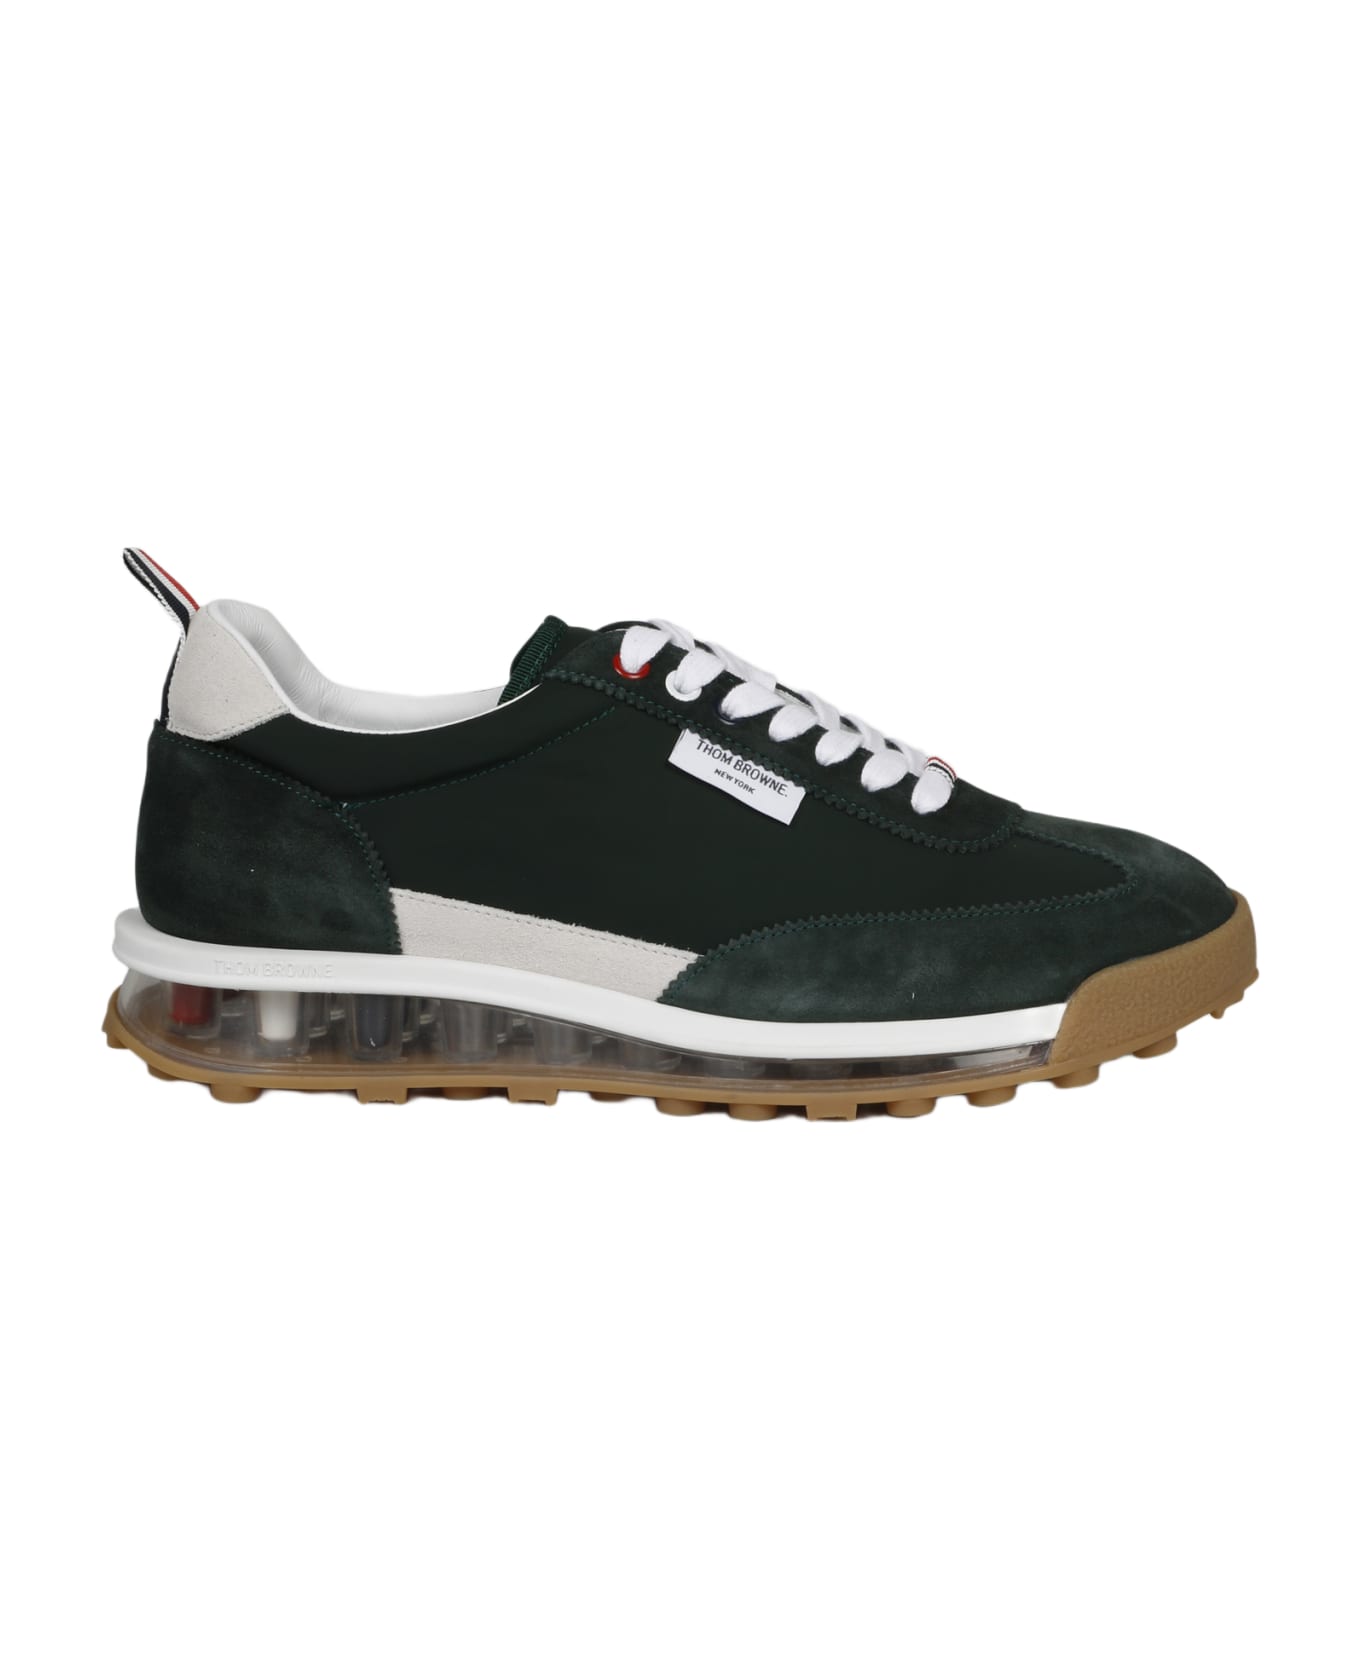 Thom Browne Tech Runner Shoes - Green